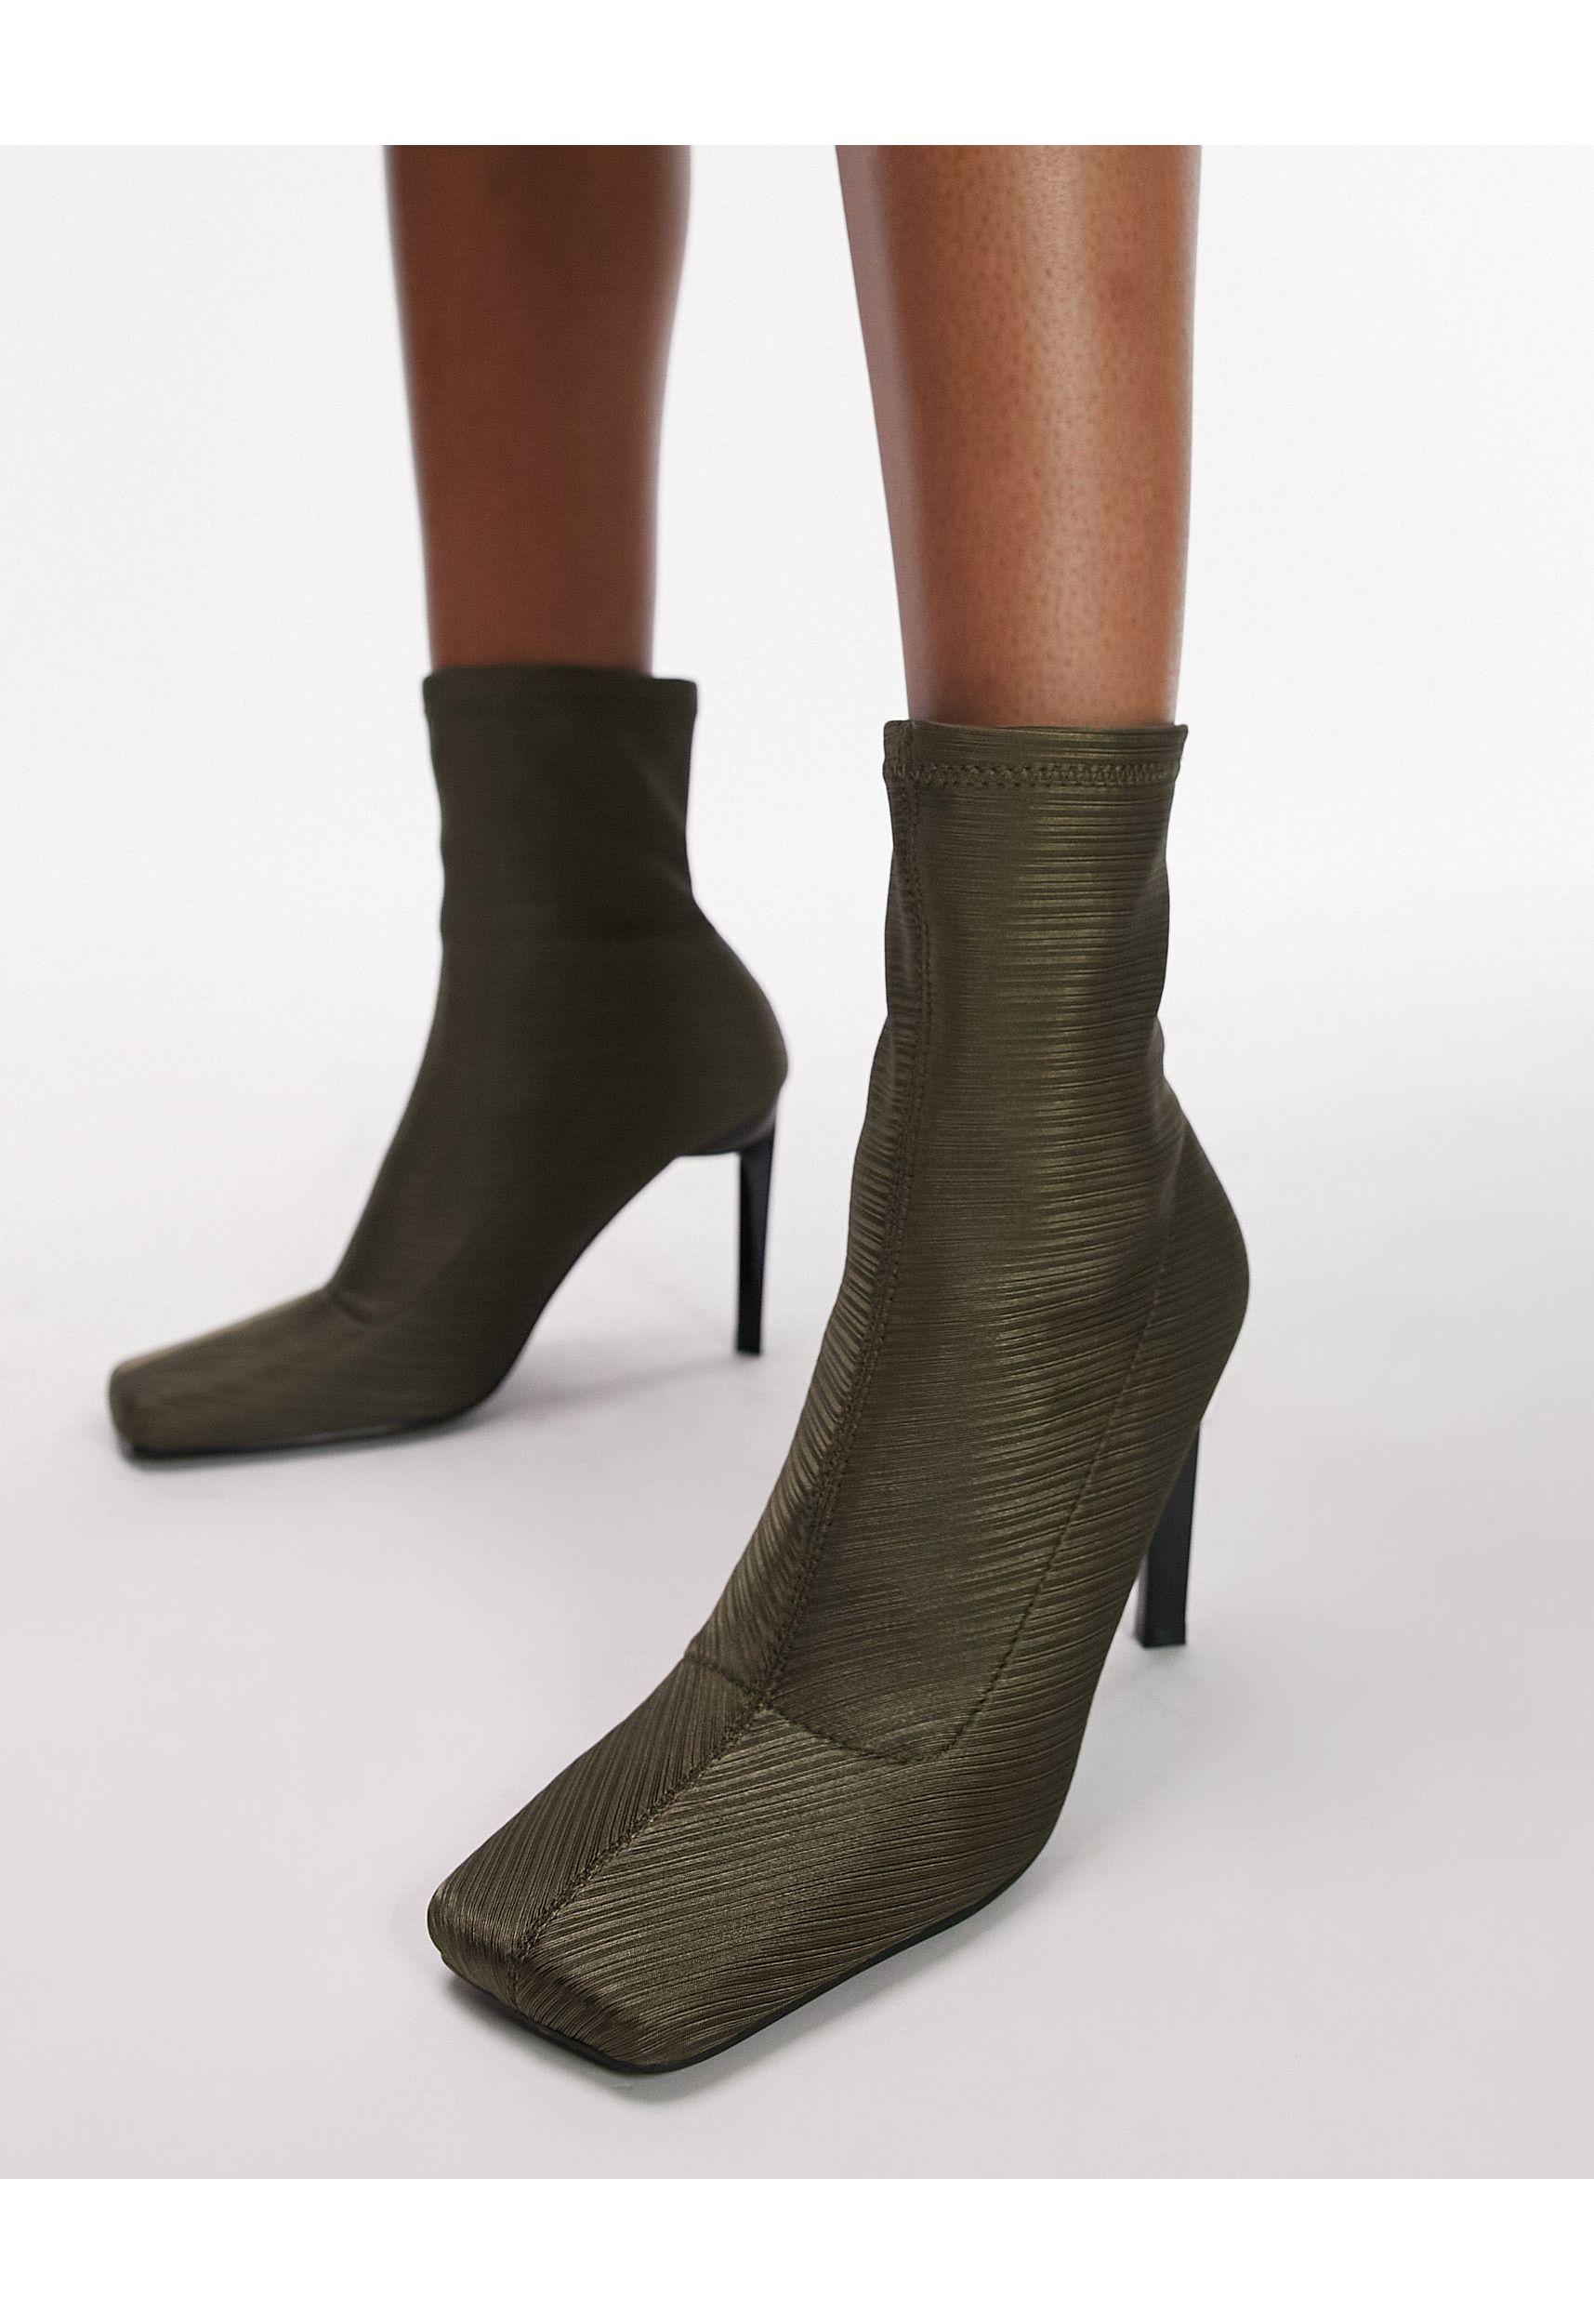 TOPSHOP Tia High Heeled Sock Boots in Natural | Lyst Canada